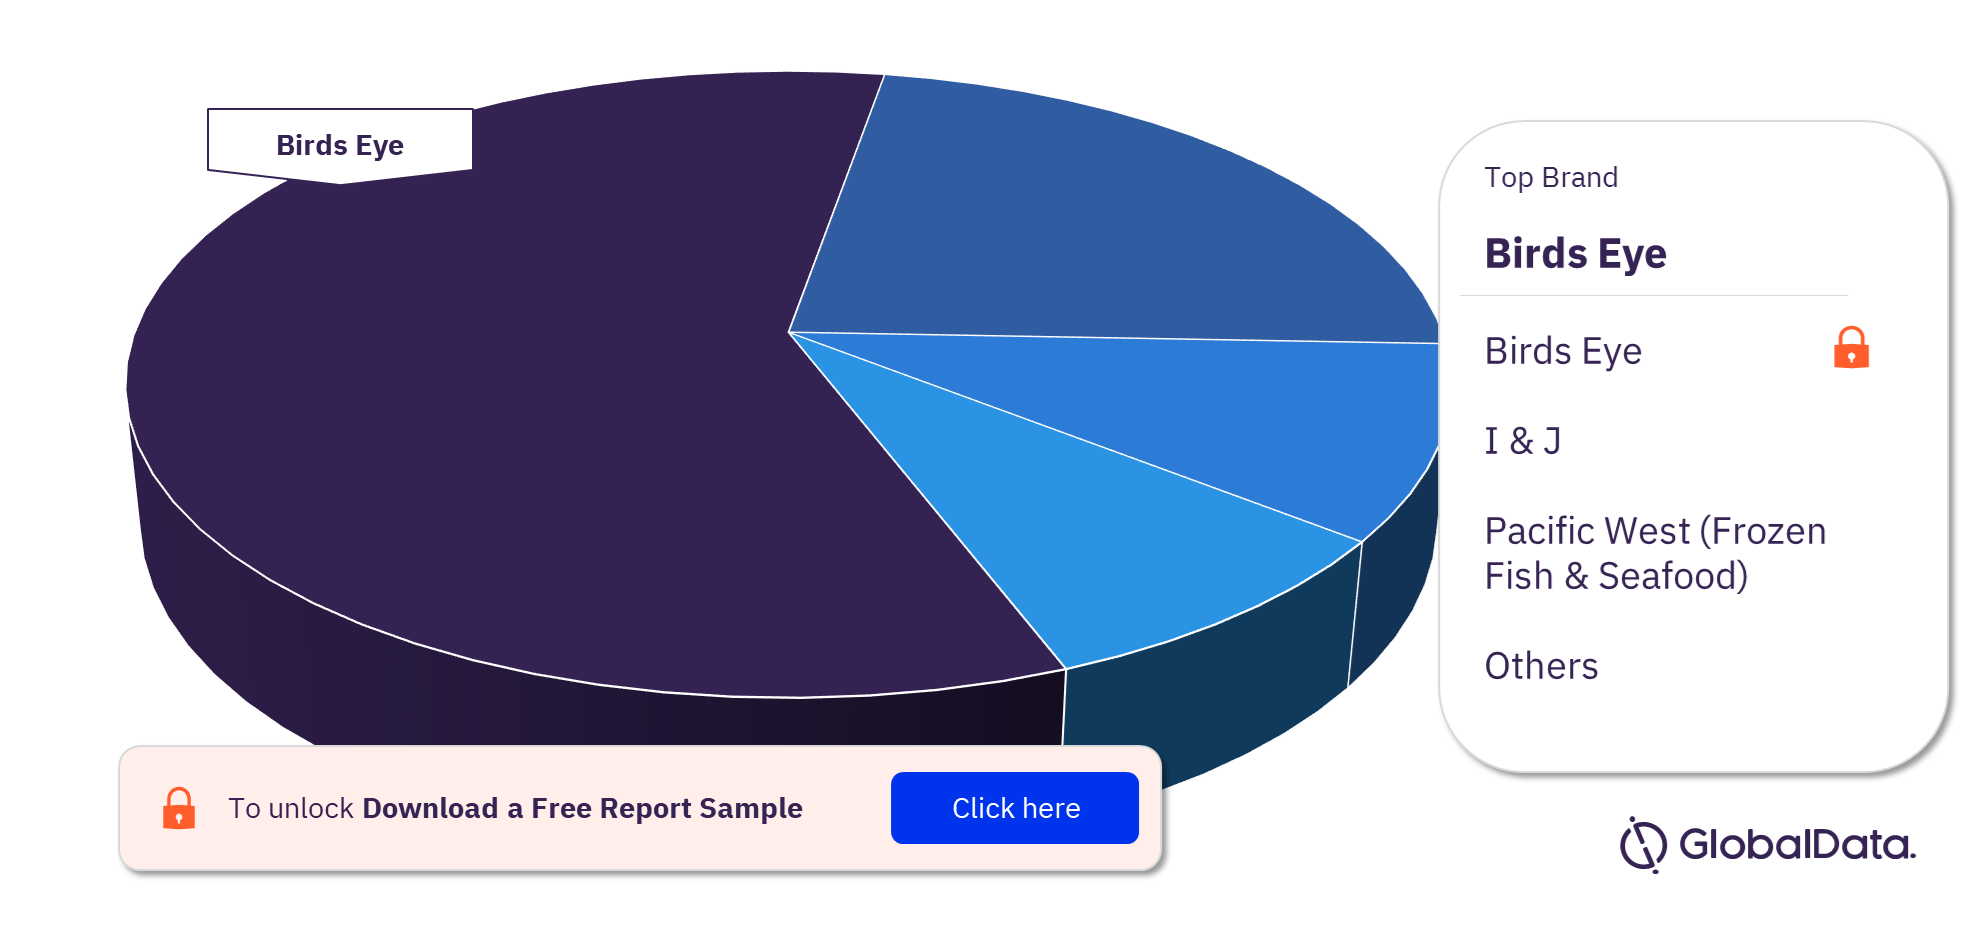 Australia Frozen Fish and Seafood Market Analysis, by Brands, 2021 (%)